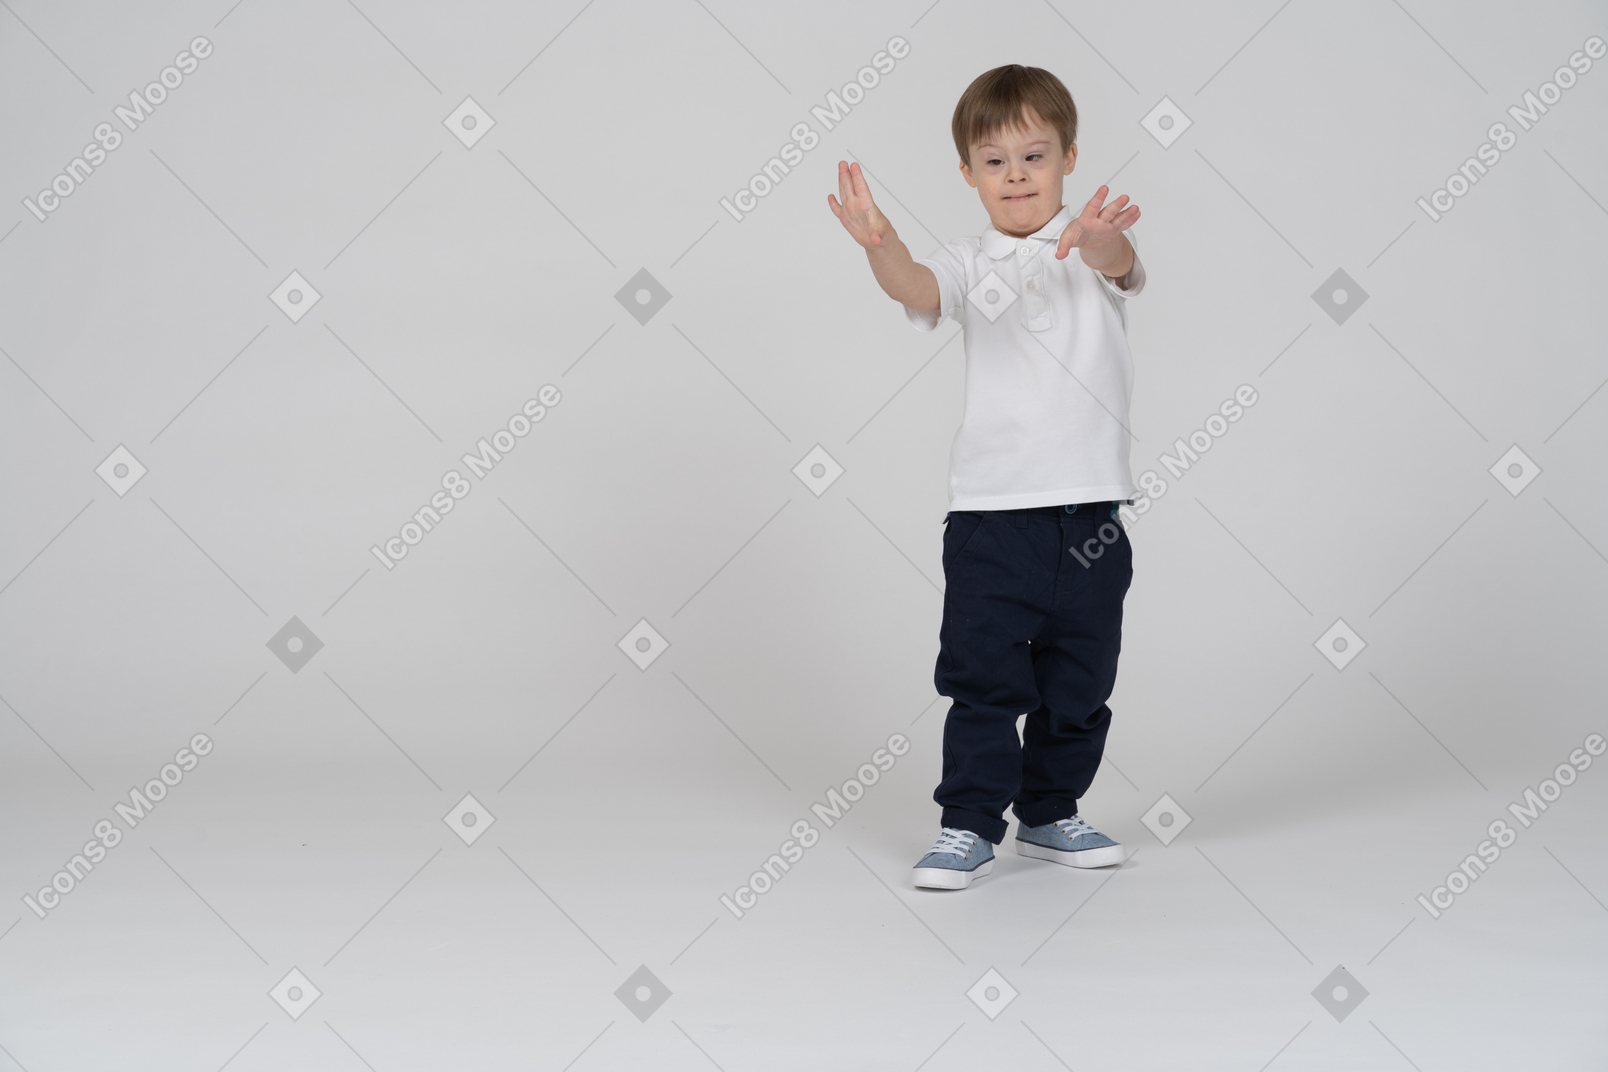 Front view of a boy reaching out with his hands